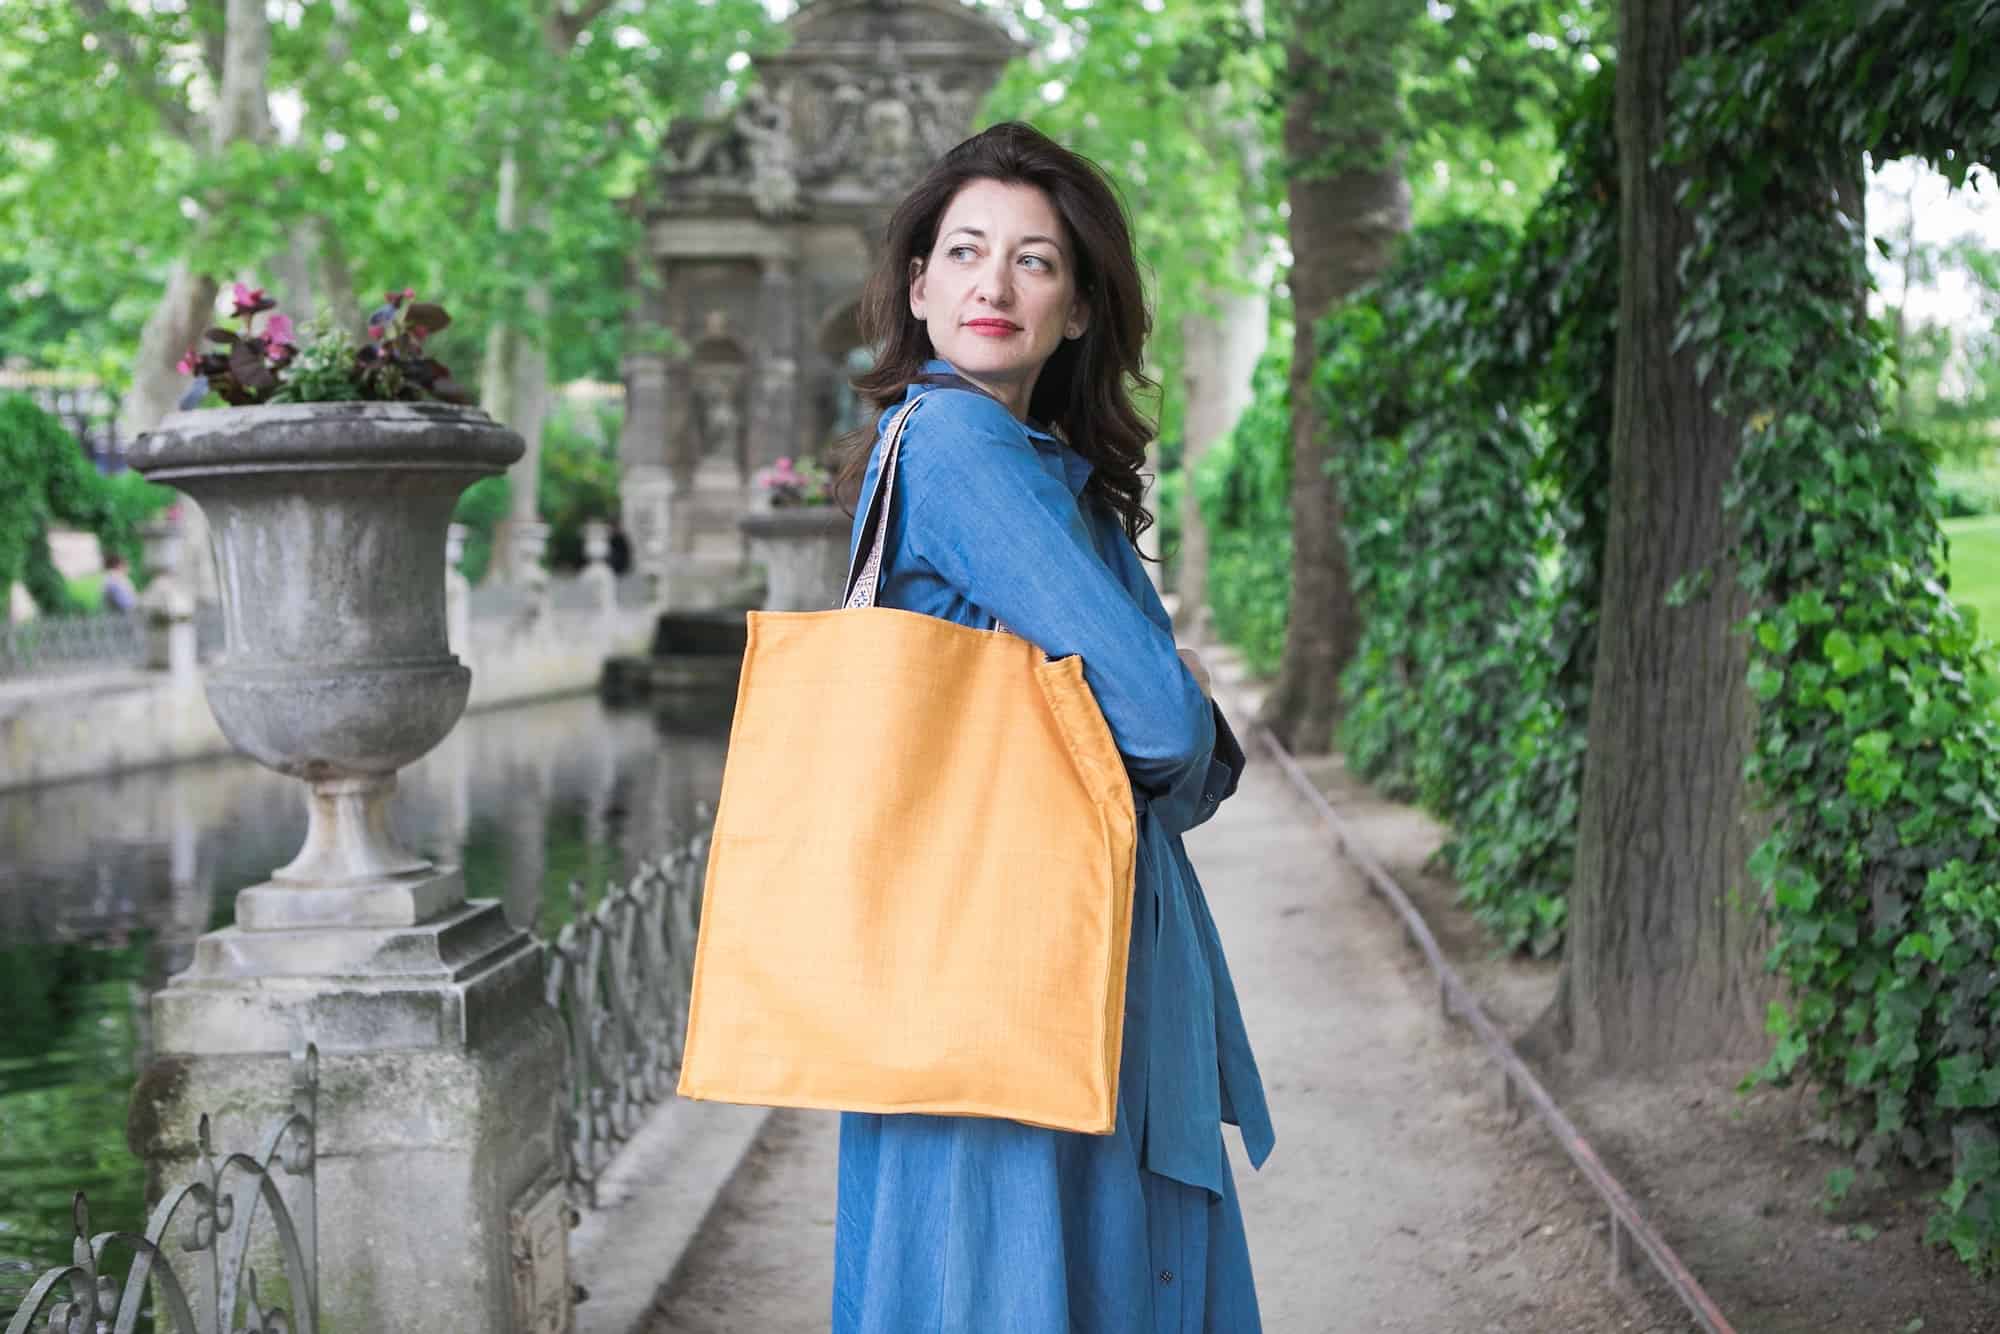 Kasia Dietz, founder of her eponymous handbag line, enjoys a lush spring day at the Medici Fountain in the Jardin du Luxembourg, one of her creamy orange tote bags slung over her shoulder.